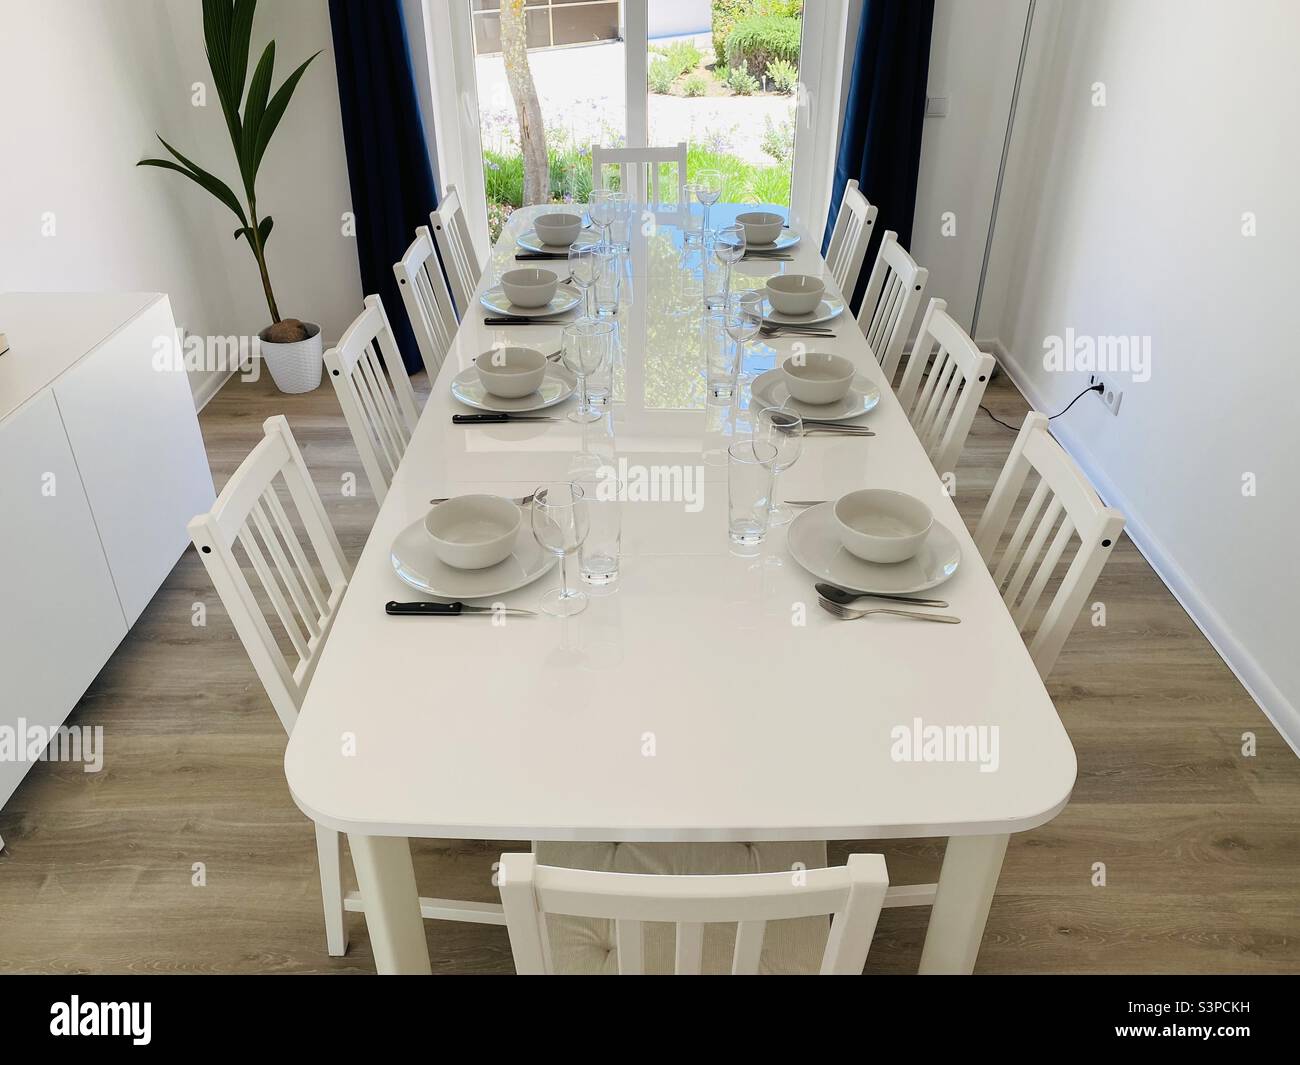 Dining room with white furniture and laid table Stock Photo